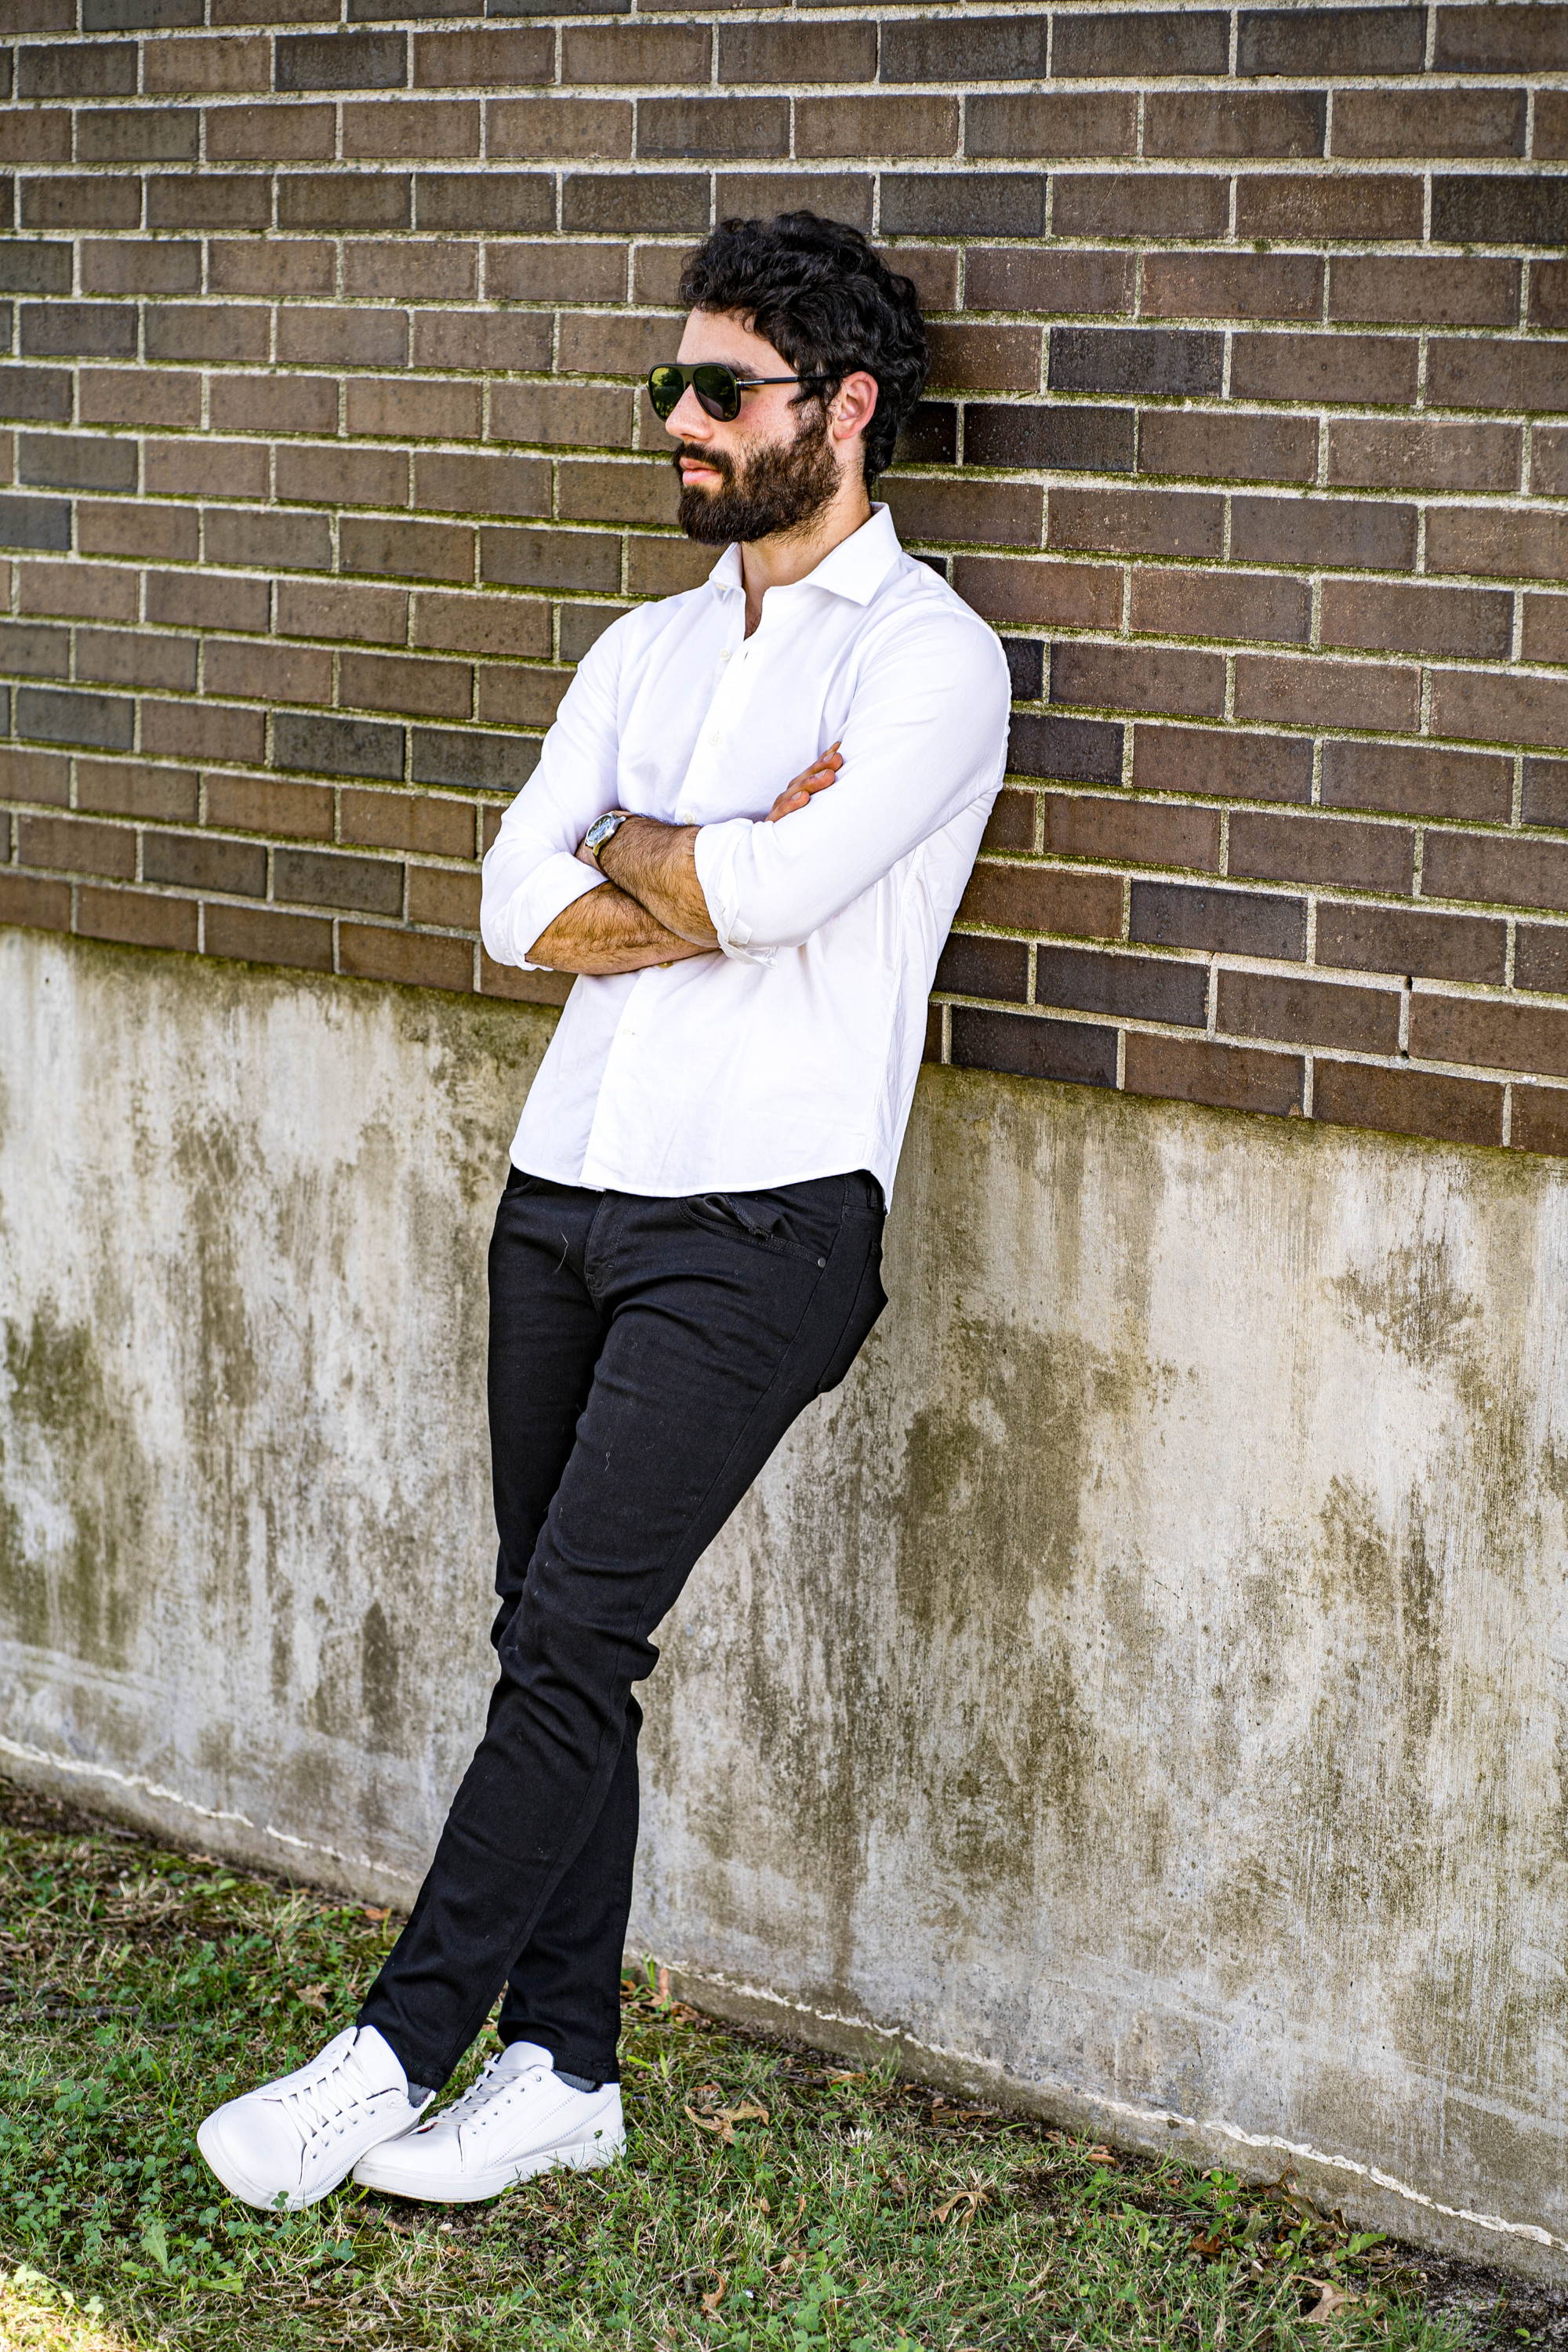 Man leaning against brick wall folded arms wearing a white button down shirt, white sneakers, and black jeans for short men from under510.com